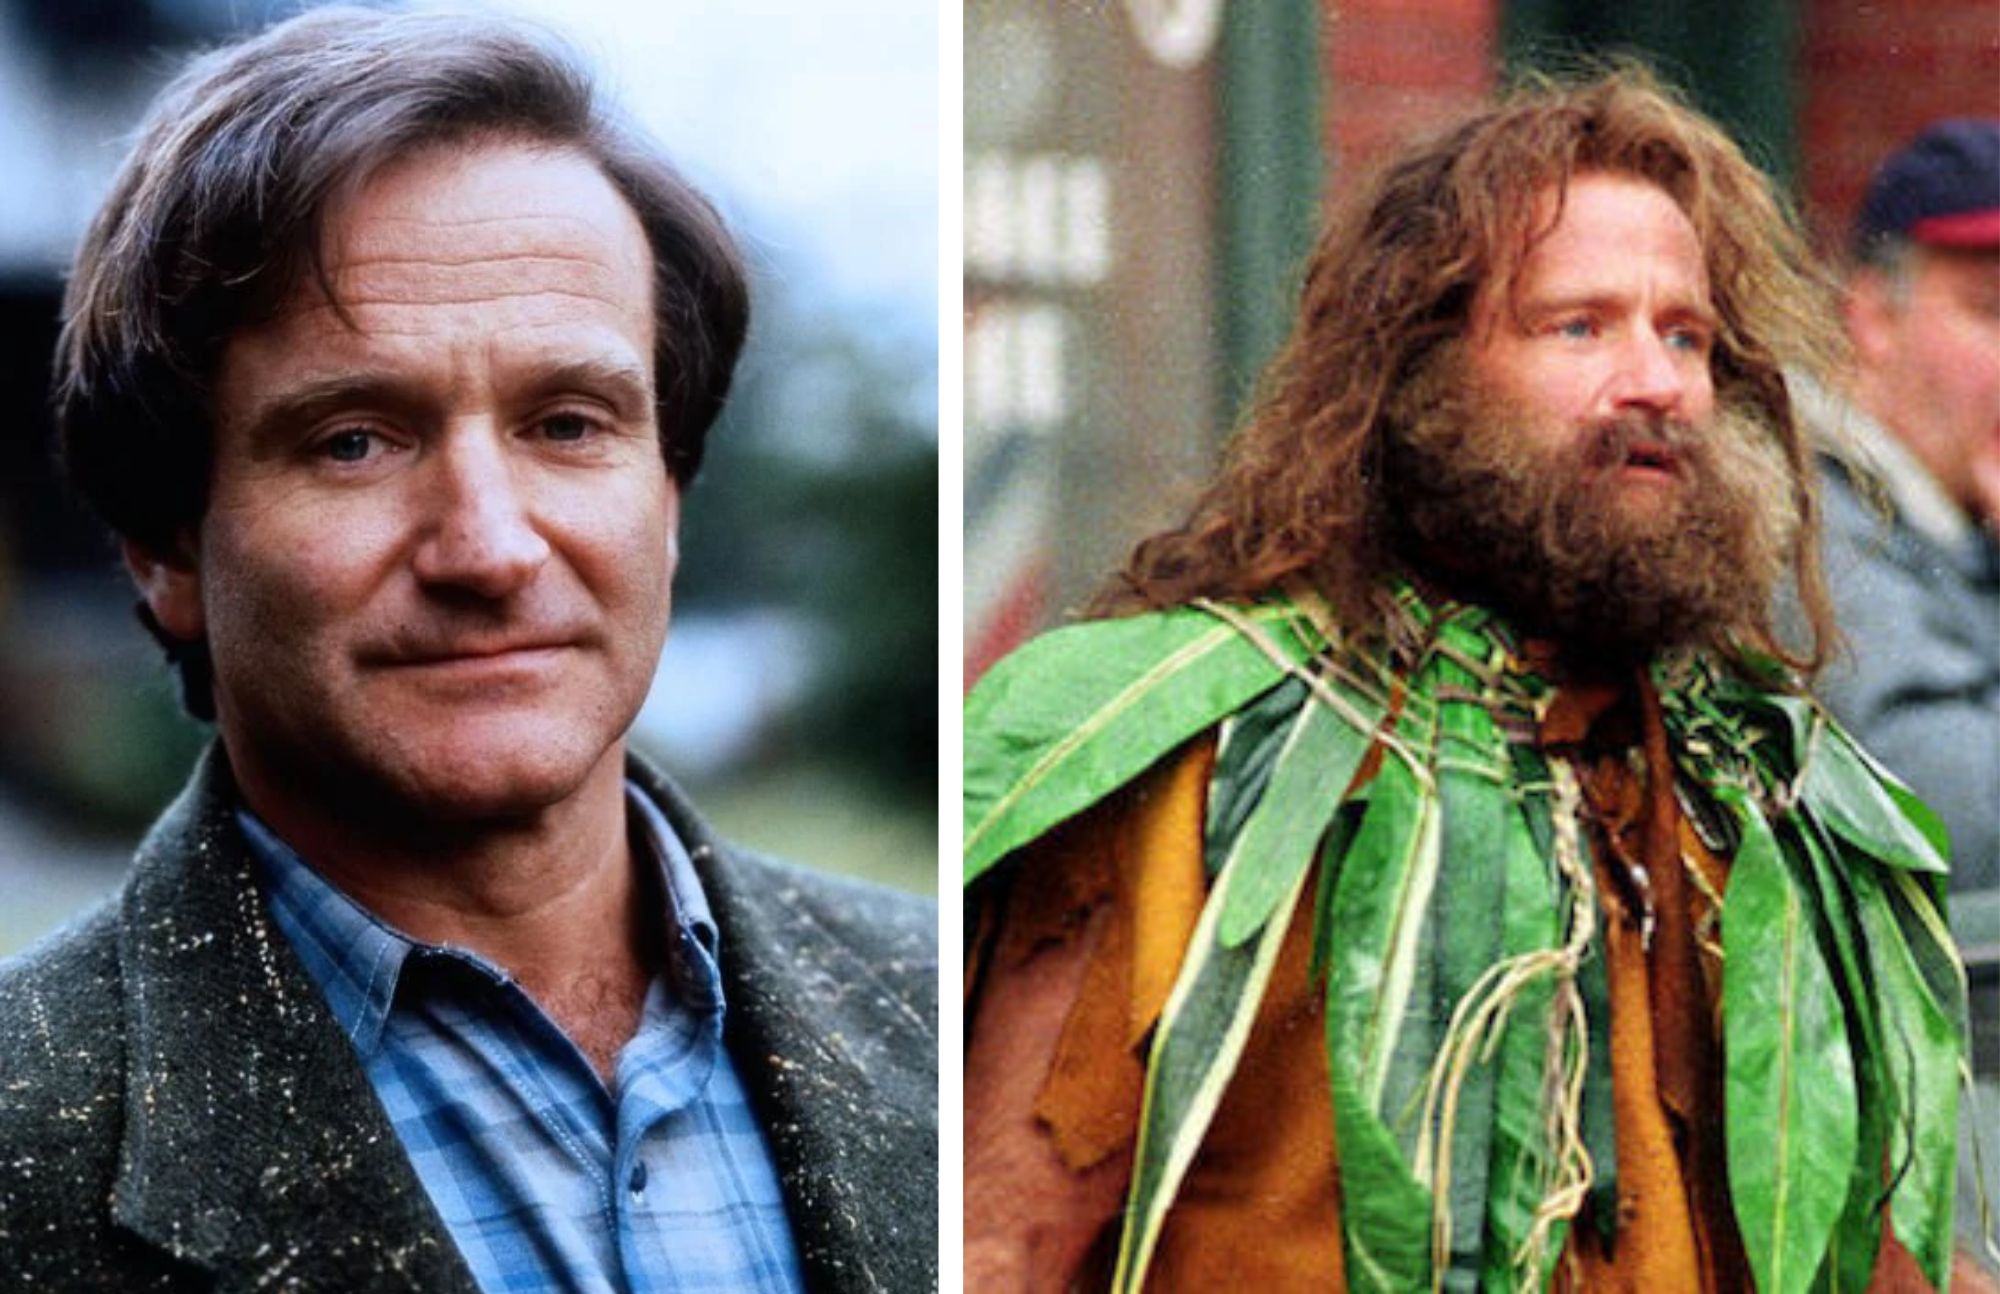 On the right is Robin William, who played Alan Parrish, who is trapped in the jungle inside the Jumanji board